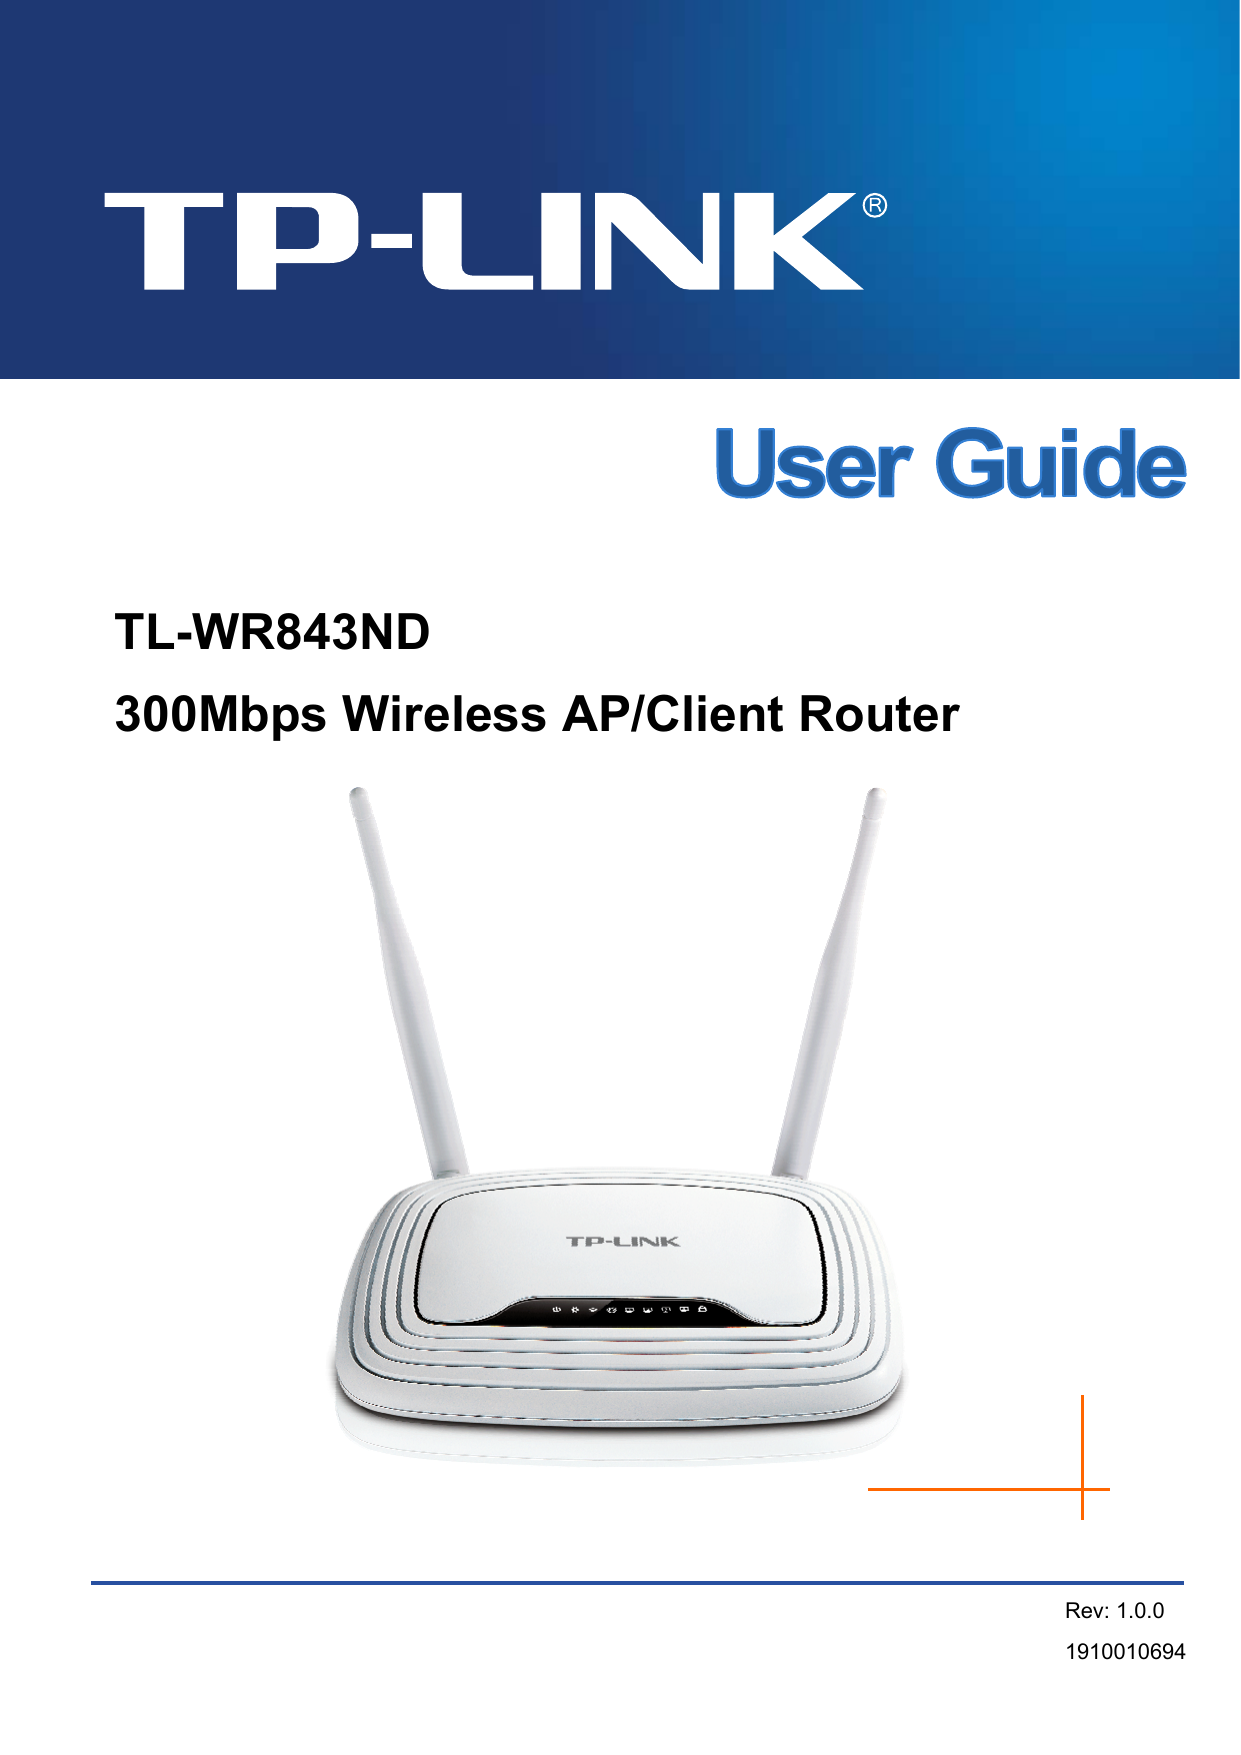    TL-WR843ND 300Mbps Wireless AP/Client Router  Rev: 1.0.0 1910010694   